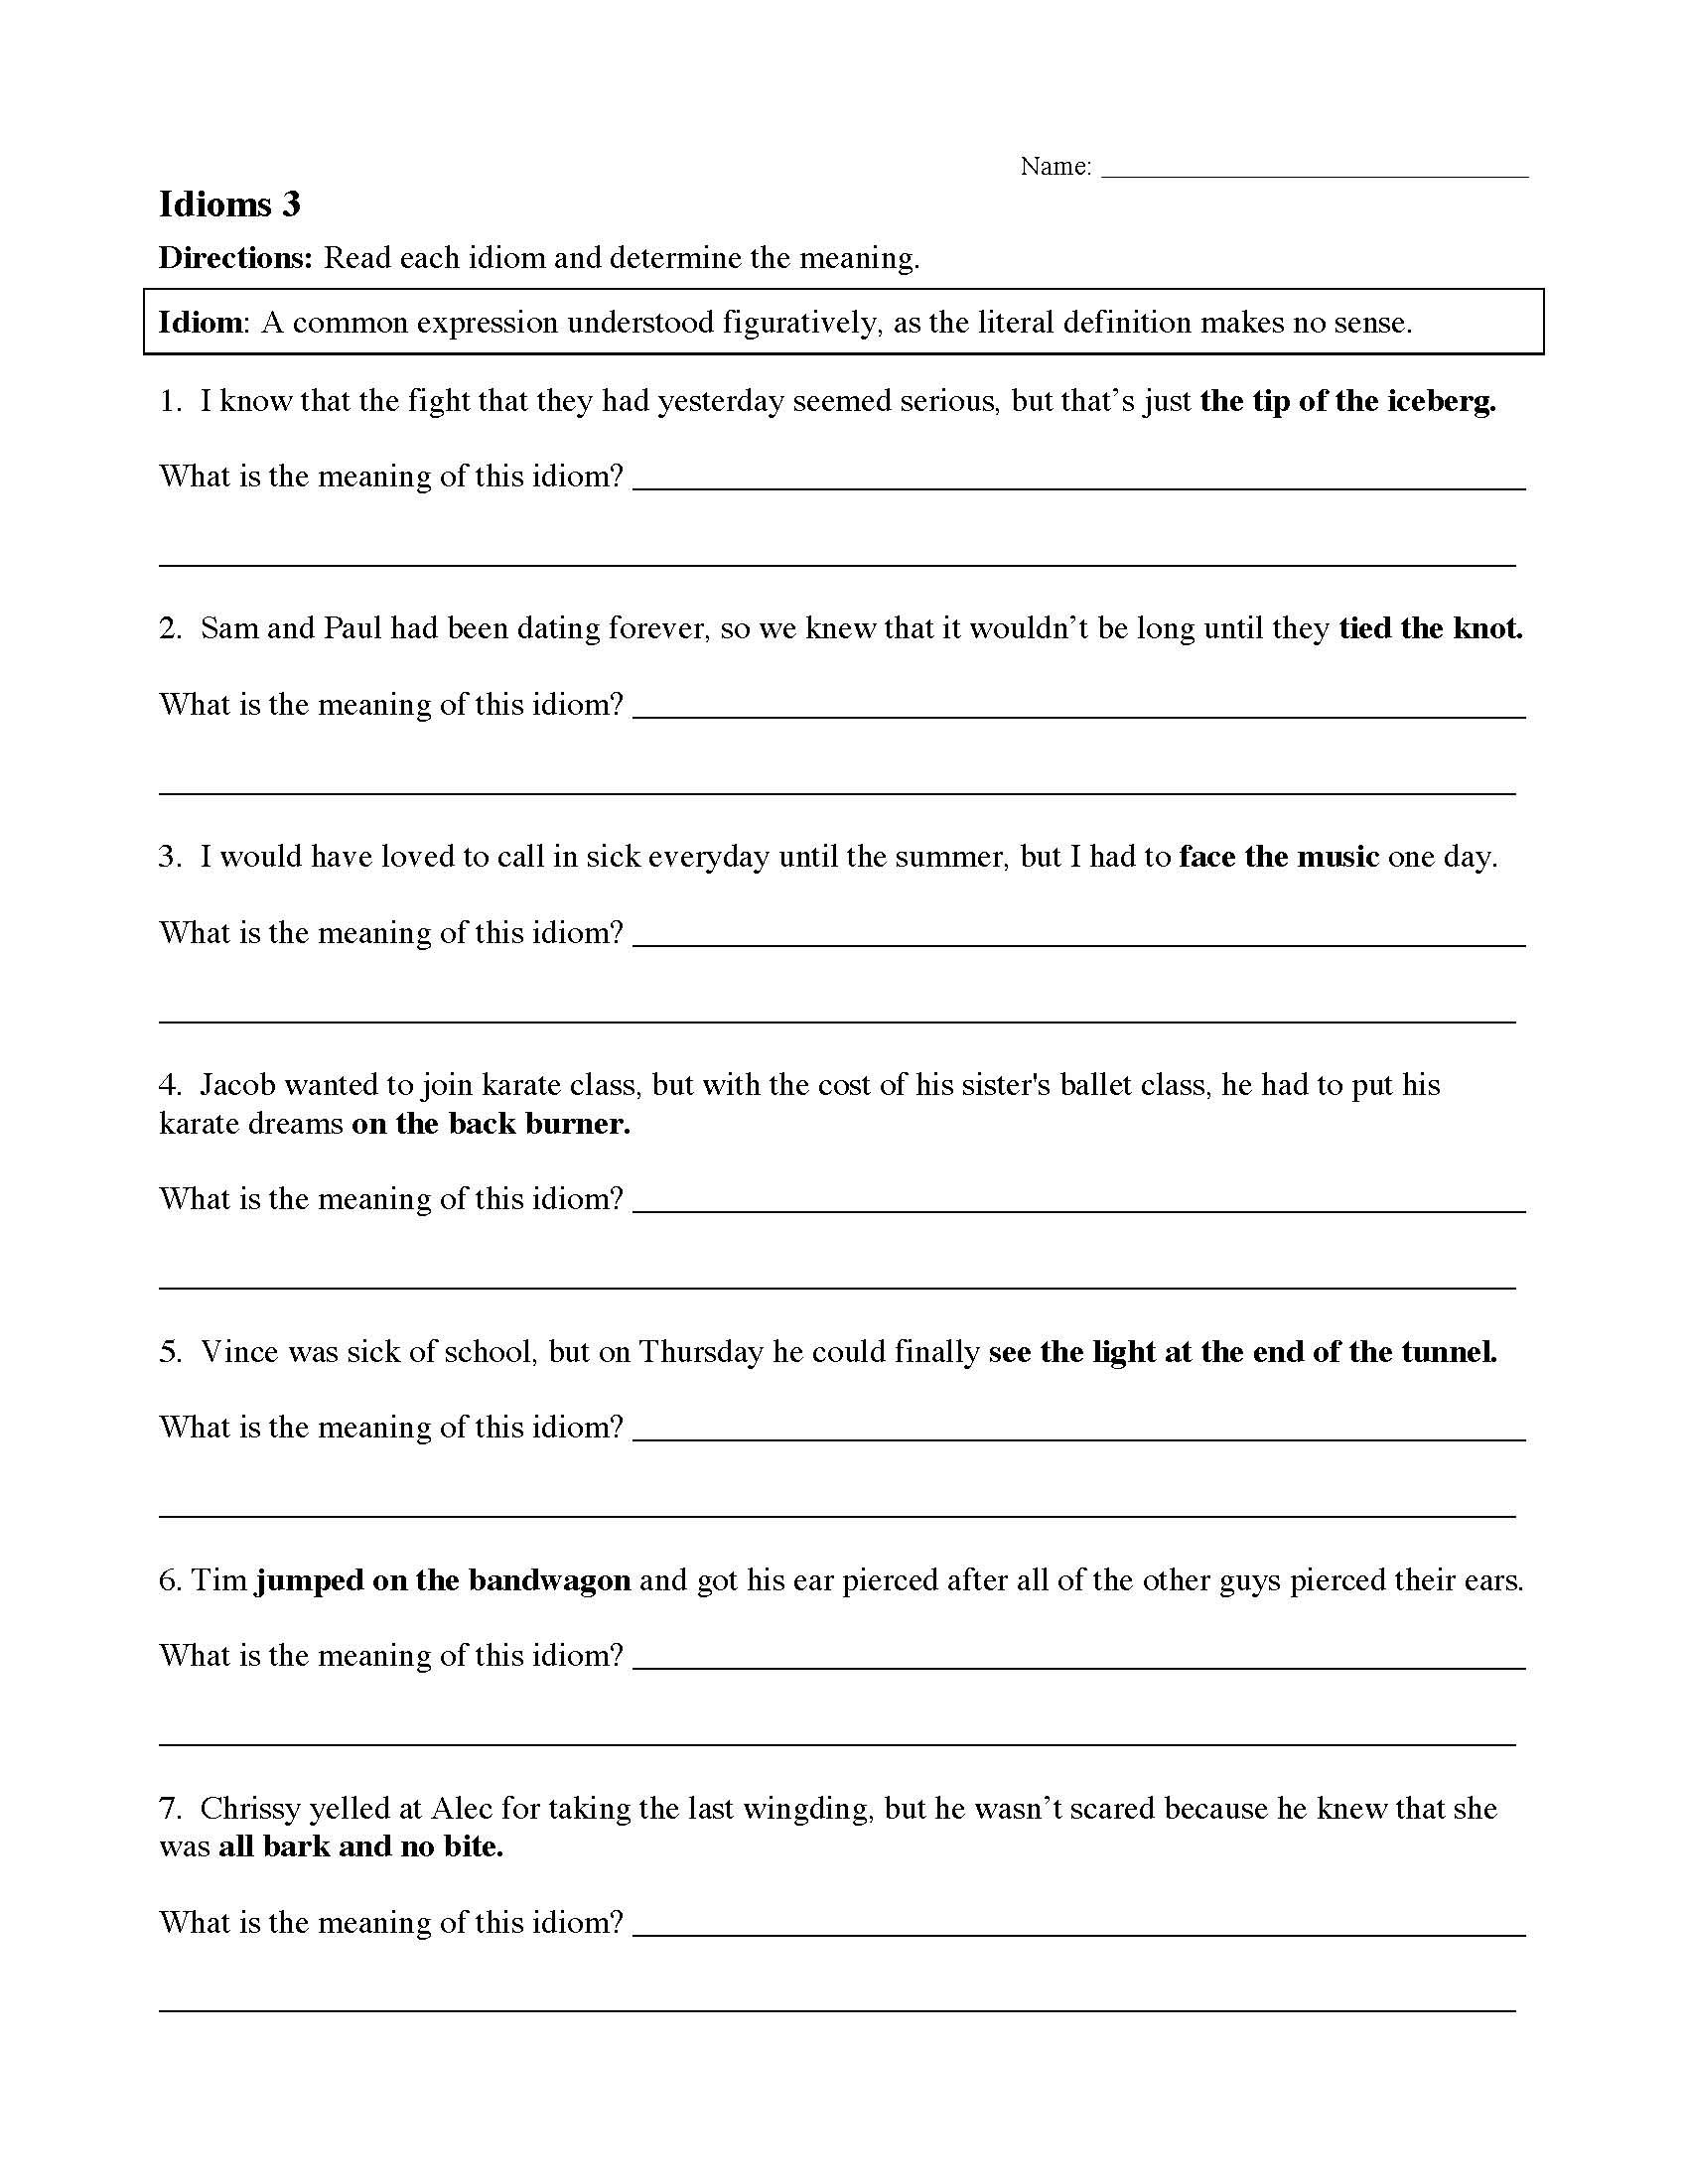 idioms-worksheet-3-preview